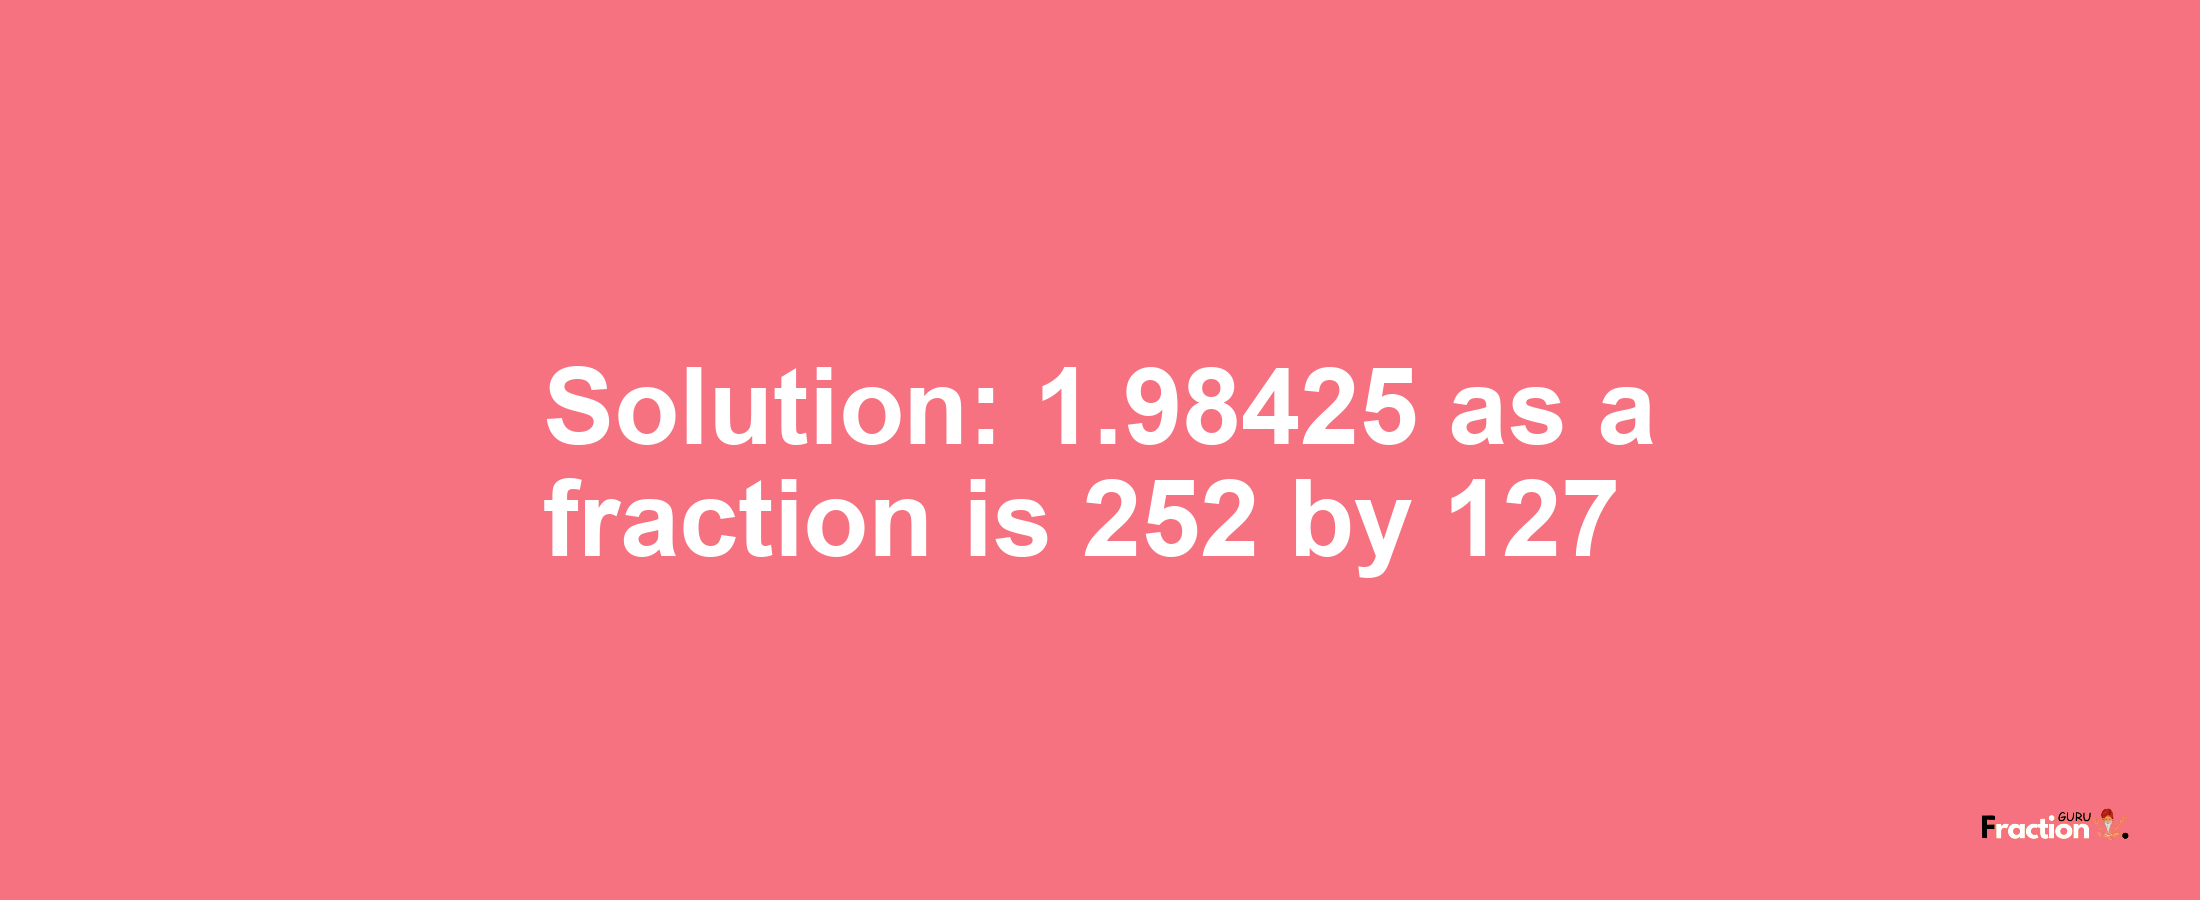 Solution:1.98425 as a fraction is 252/127